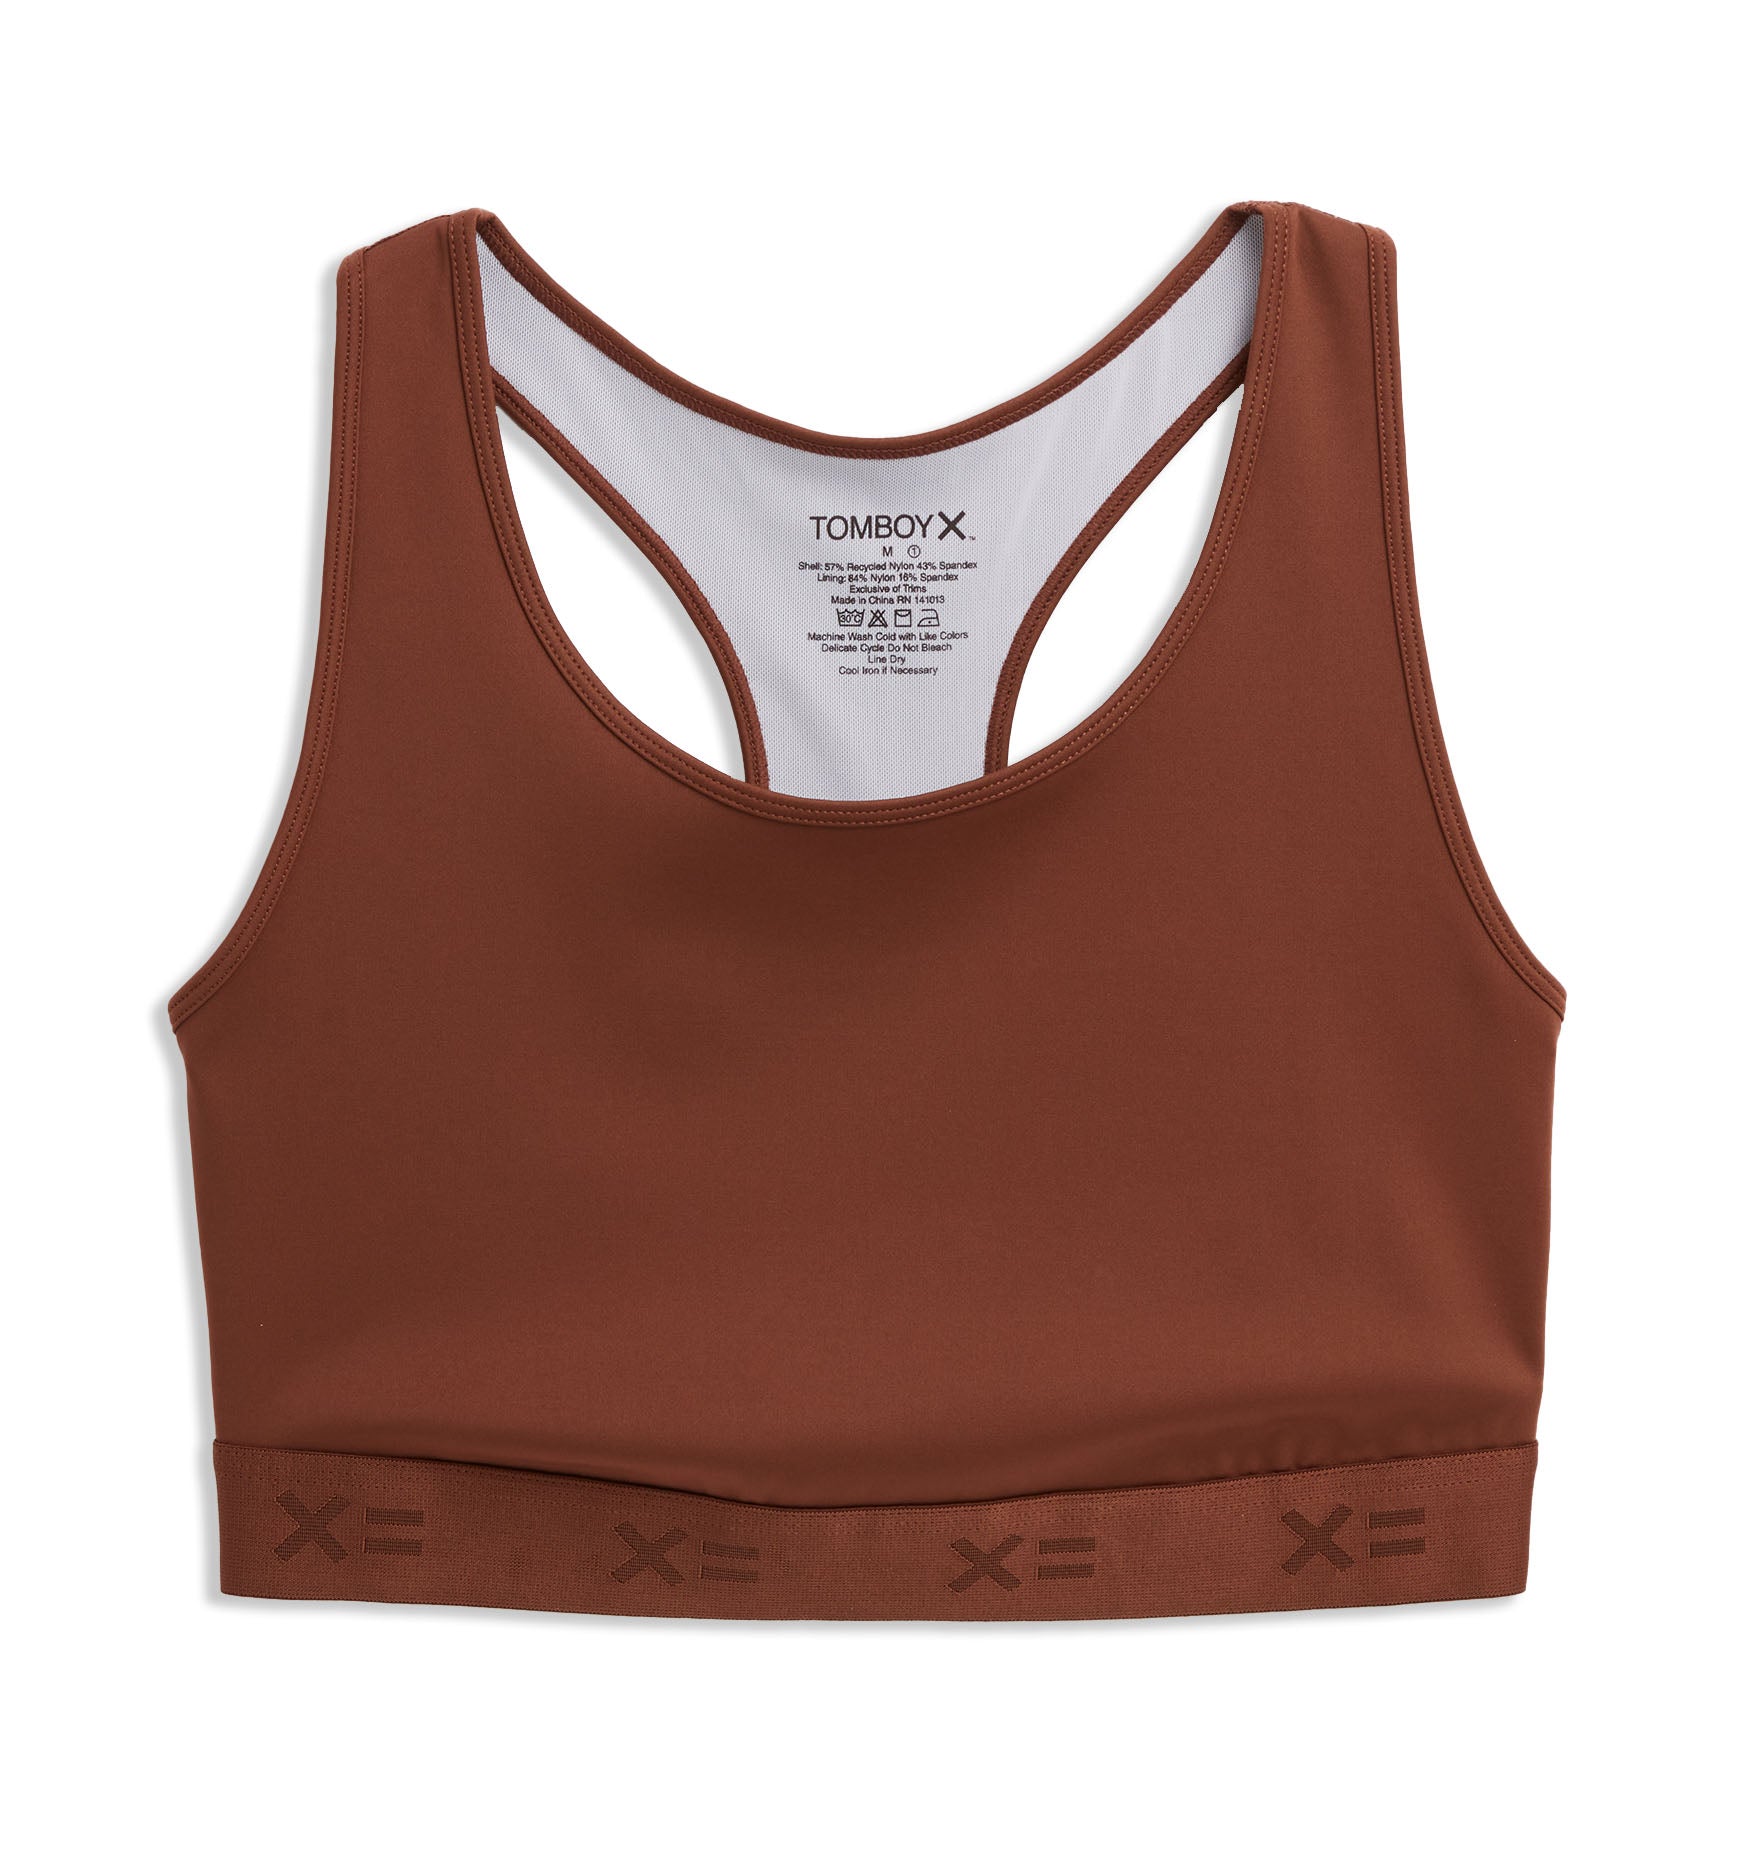 Review for TomboyX Compression Tops 